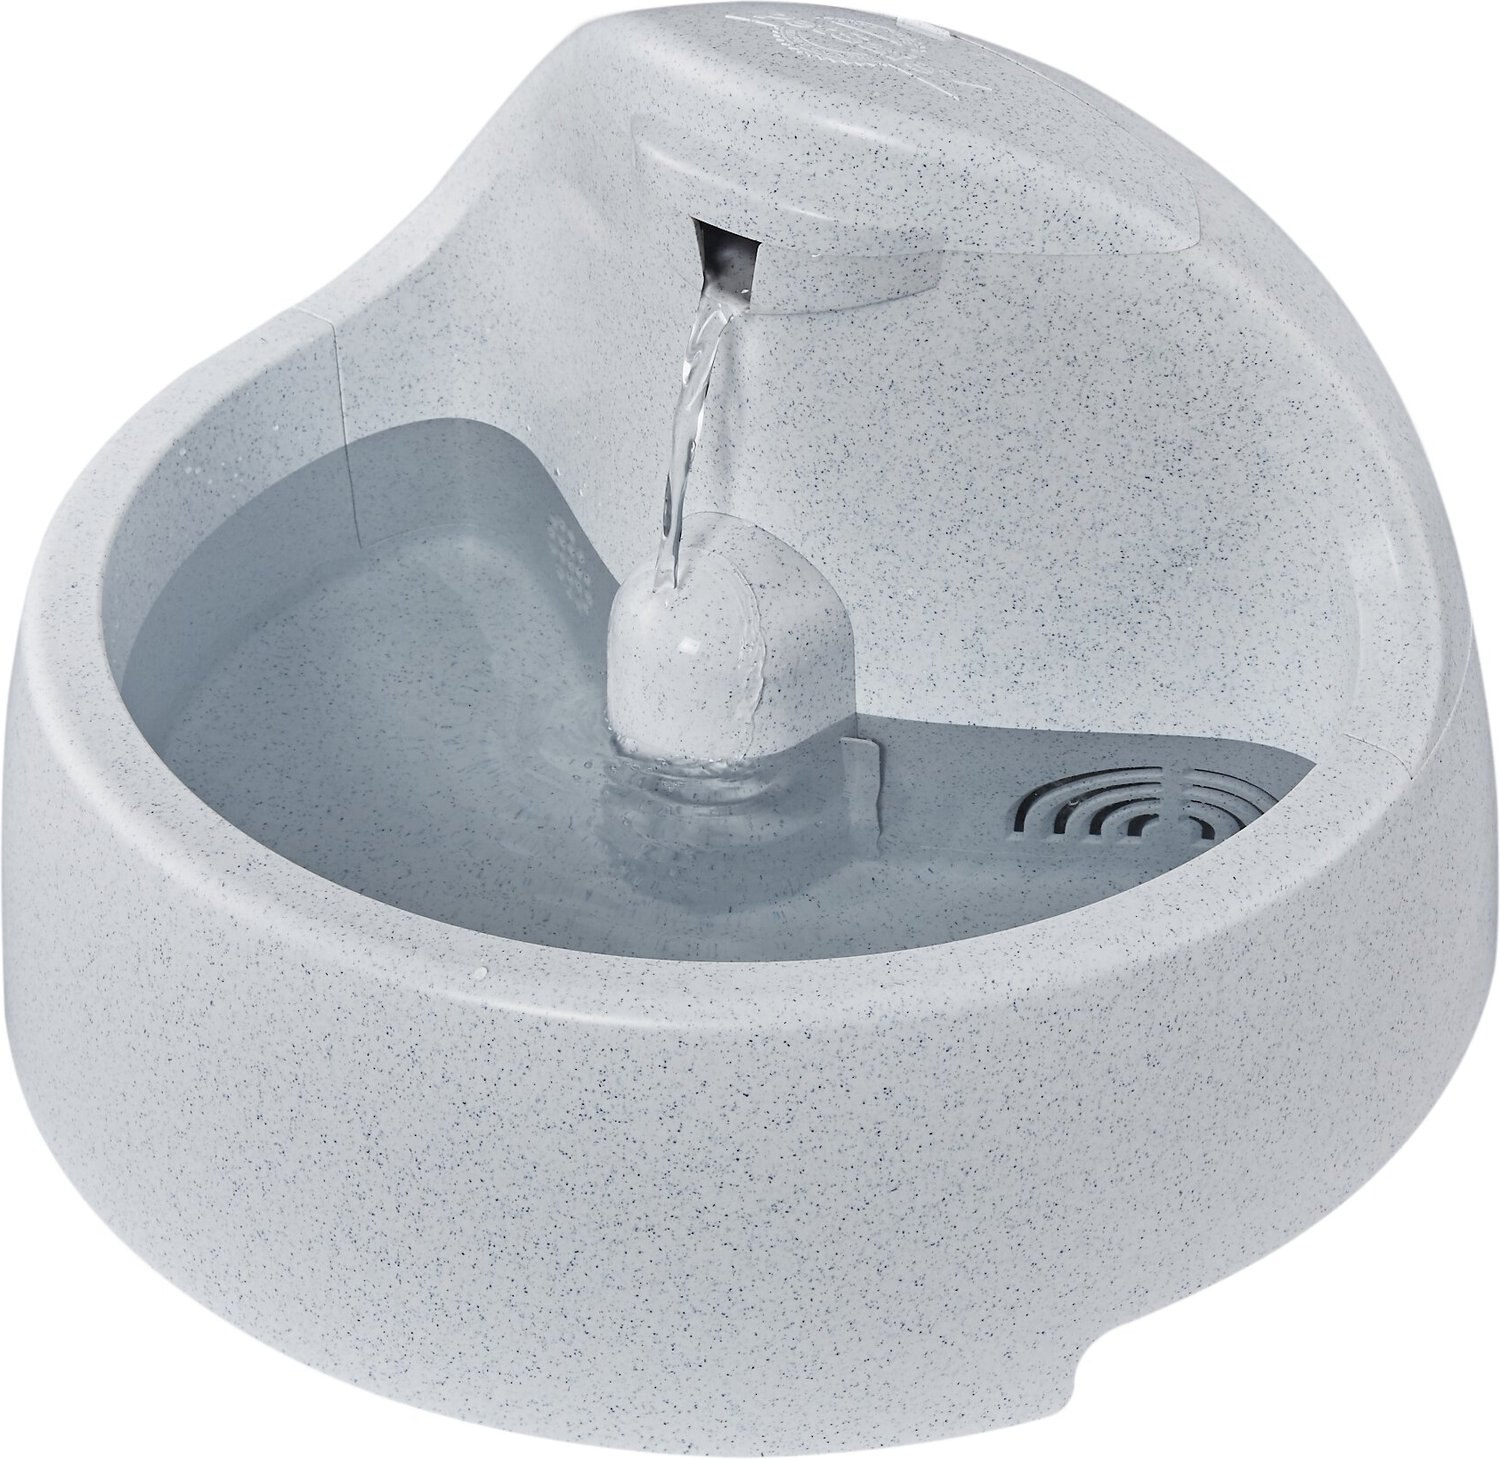 Drinkwell Everflow Plastic Dog Cat, Drinkwell Outdoor Pet Fountain